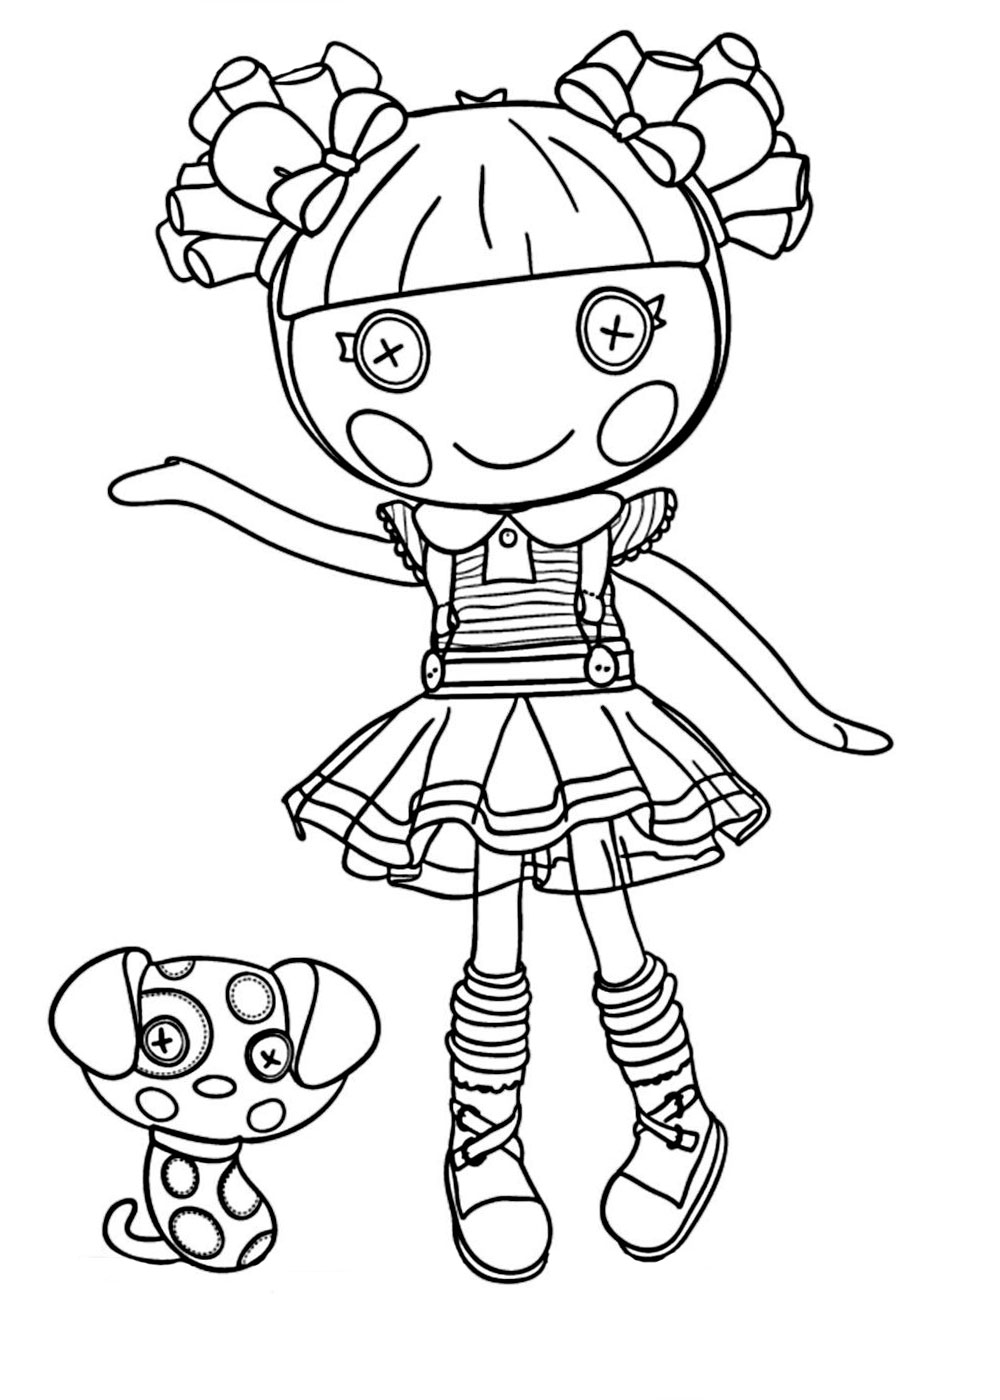 Lalaloopsy coloring pages for girls to print for free